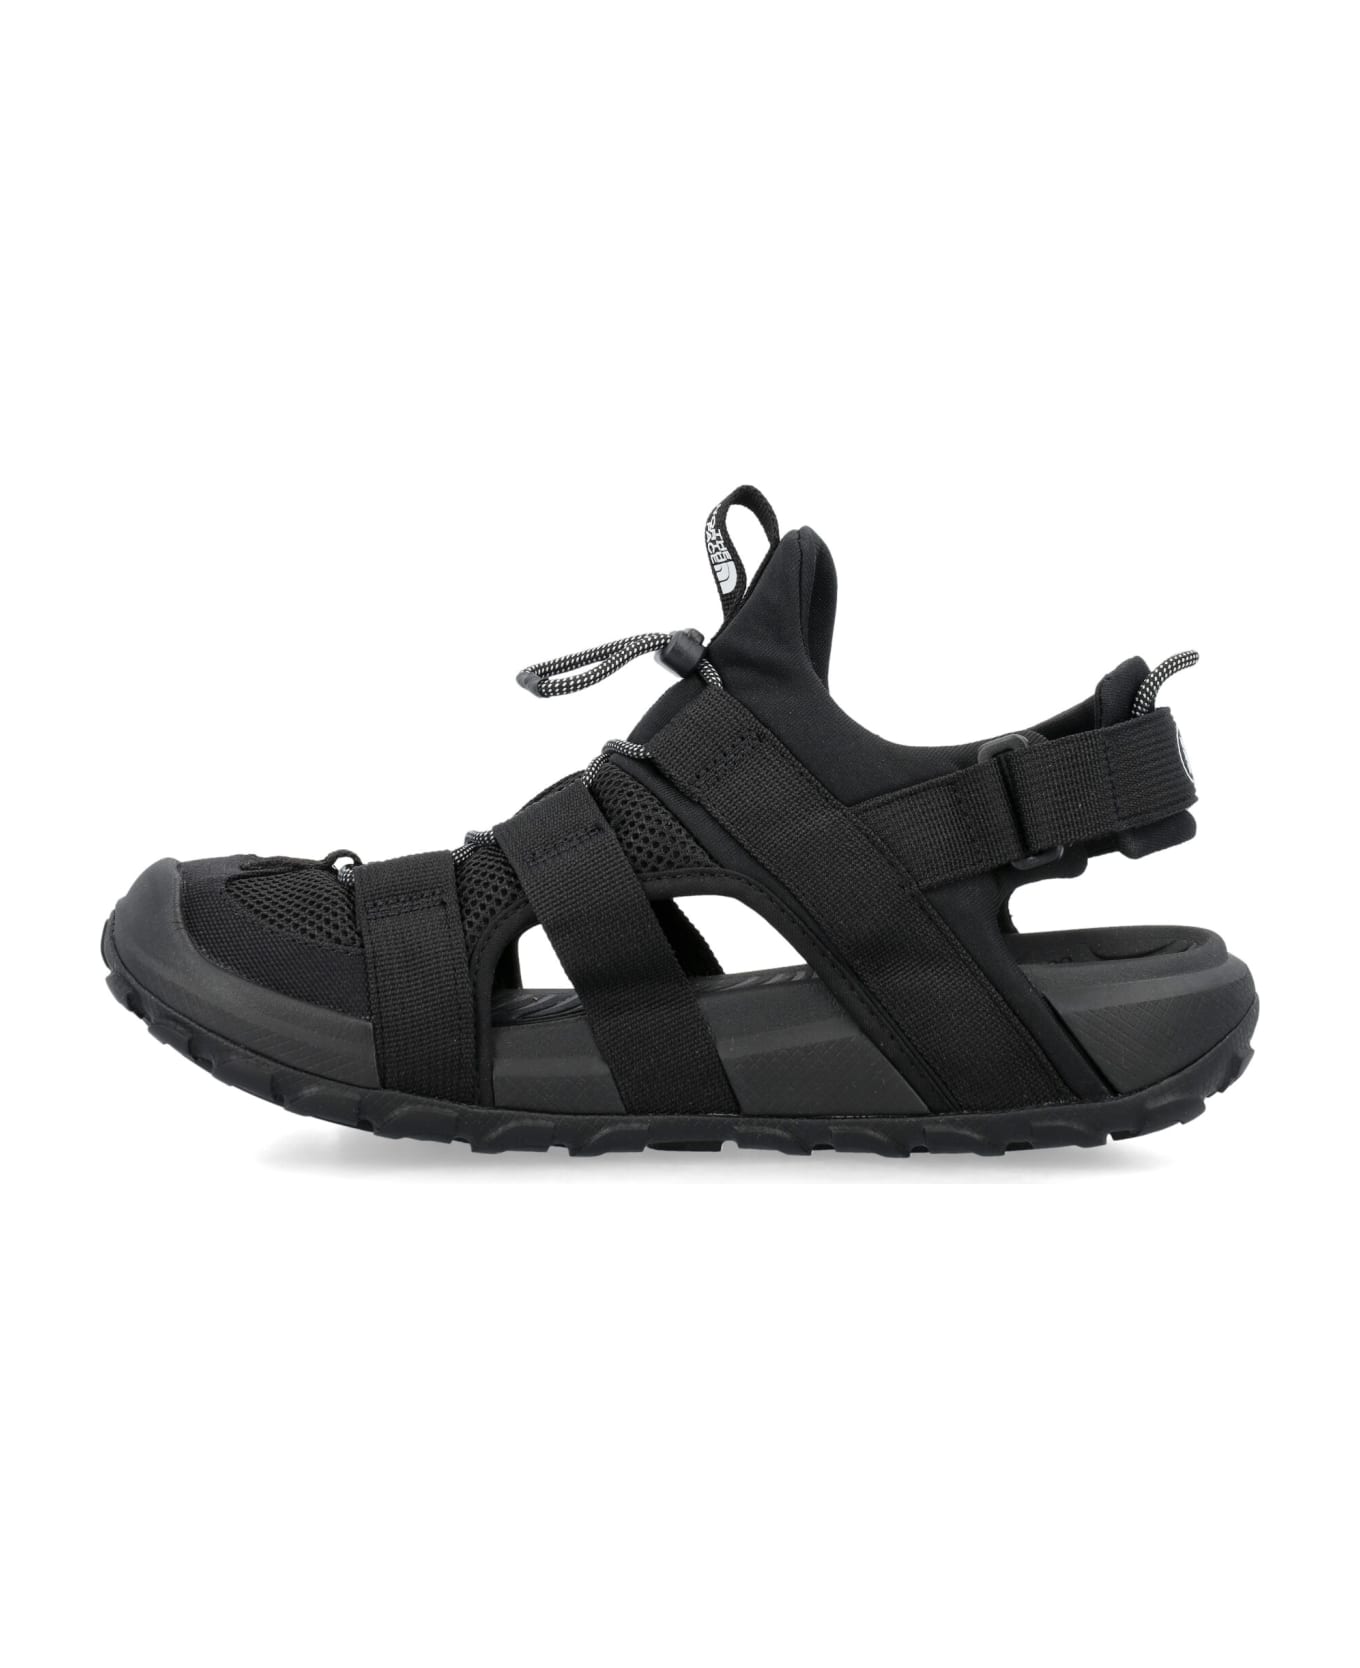 The North Face Explore Camp Shandals - BLACK